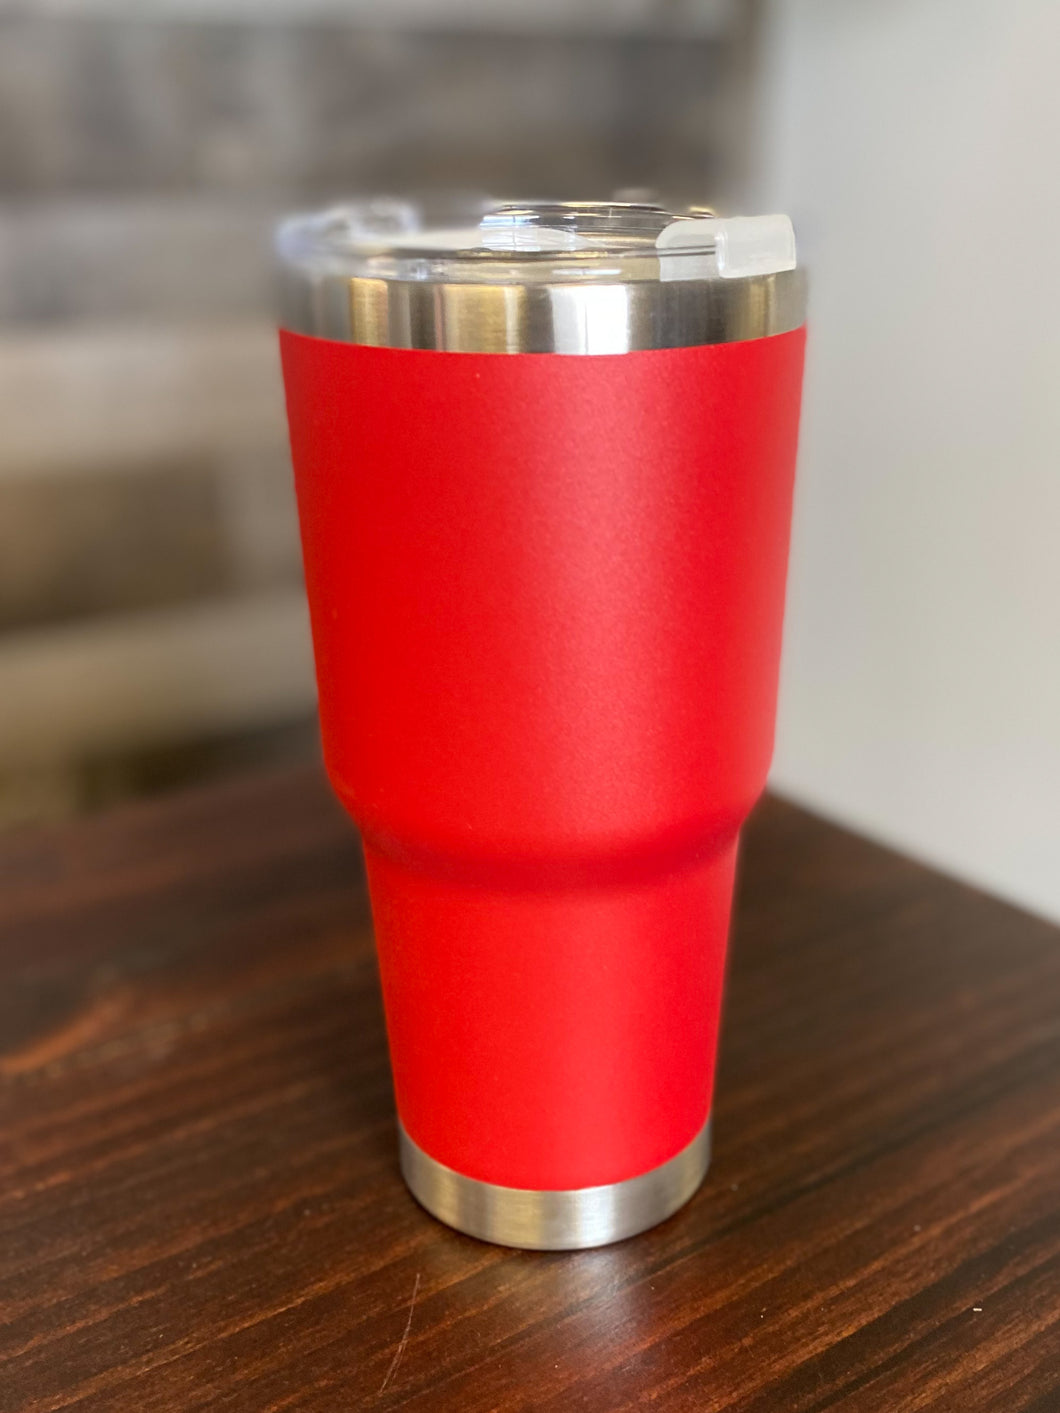 STAINLESS STEEL CUP